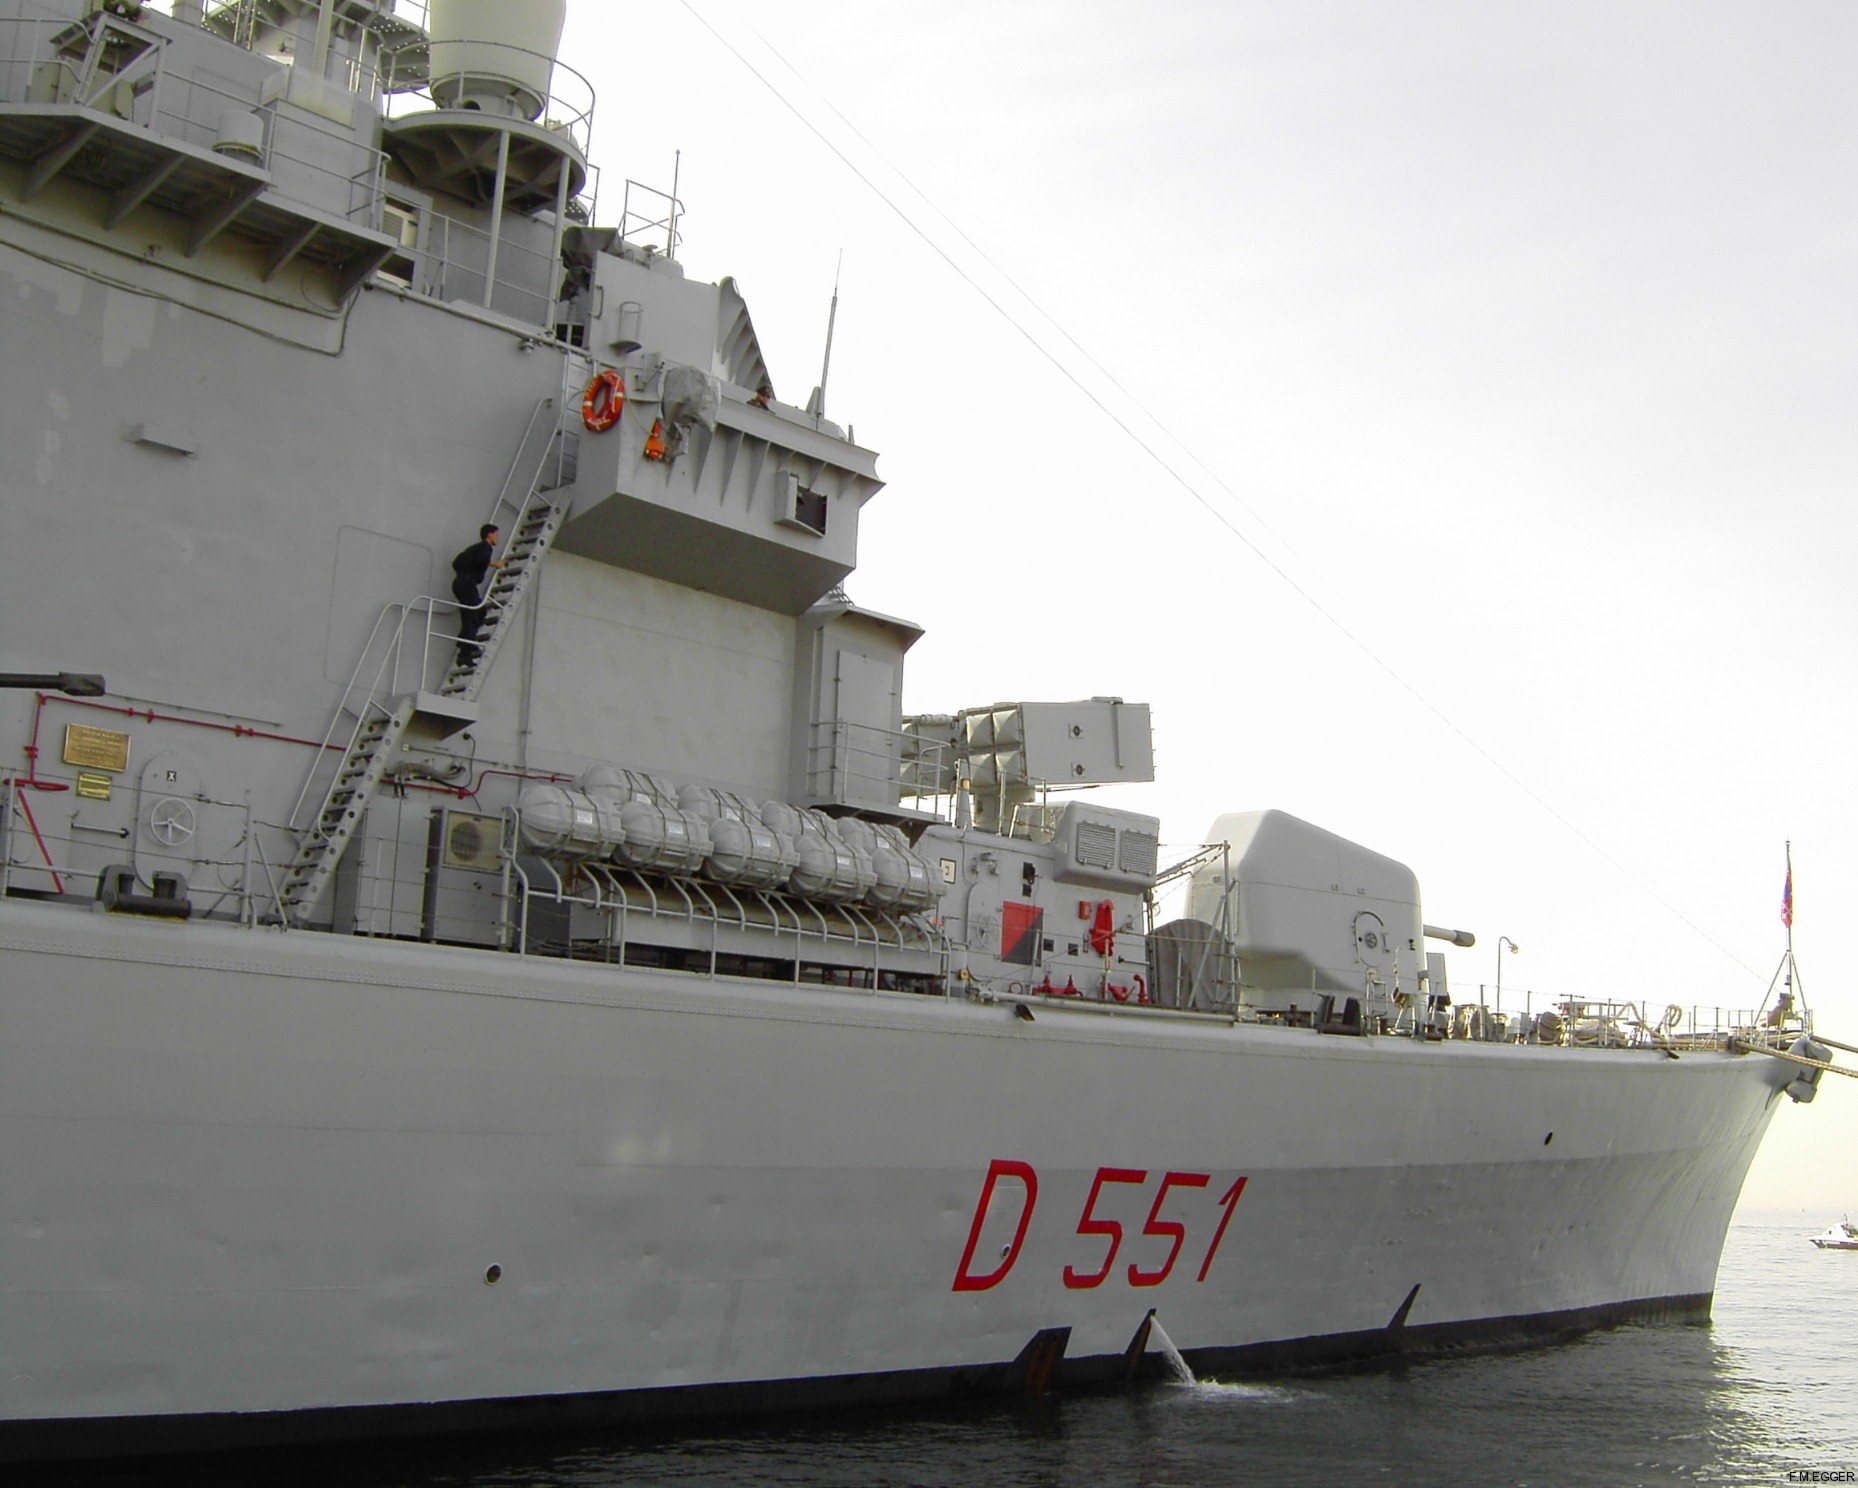 d-551 audace its nave guided missile destroyer ddg italian navy marina militare 22